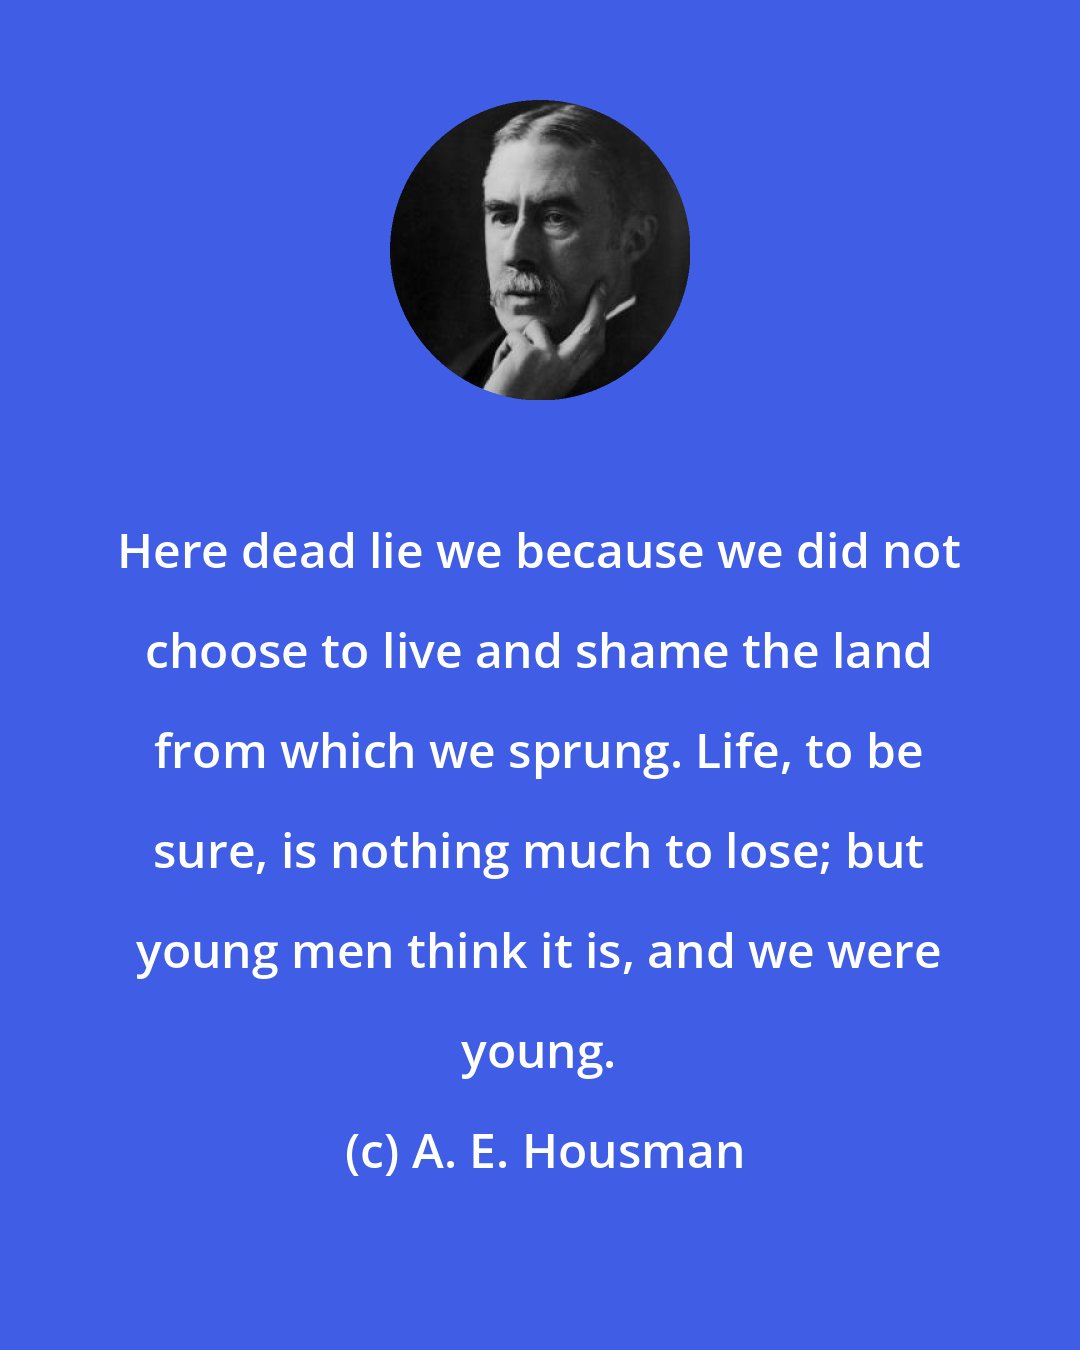 A. E. Housman: Here dead lie we because we did not choose to live and shame the land from which we sprung. Life, to be sure, is nothing much to lose; but young men think it is, and we were young.